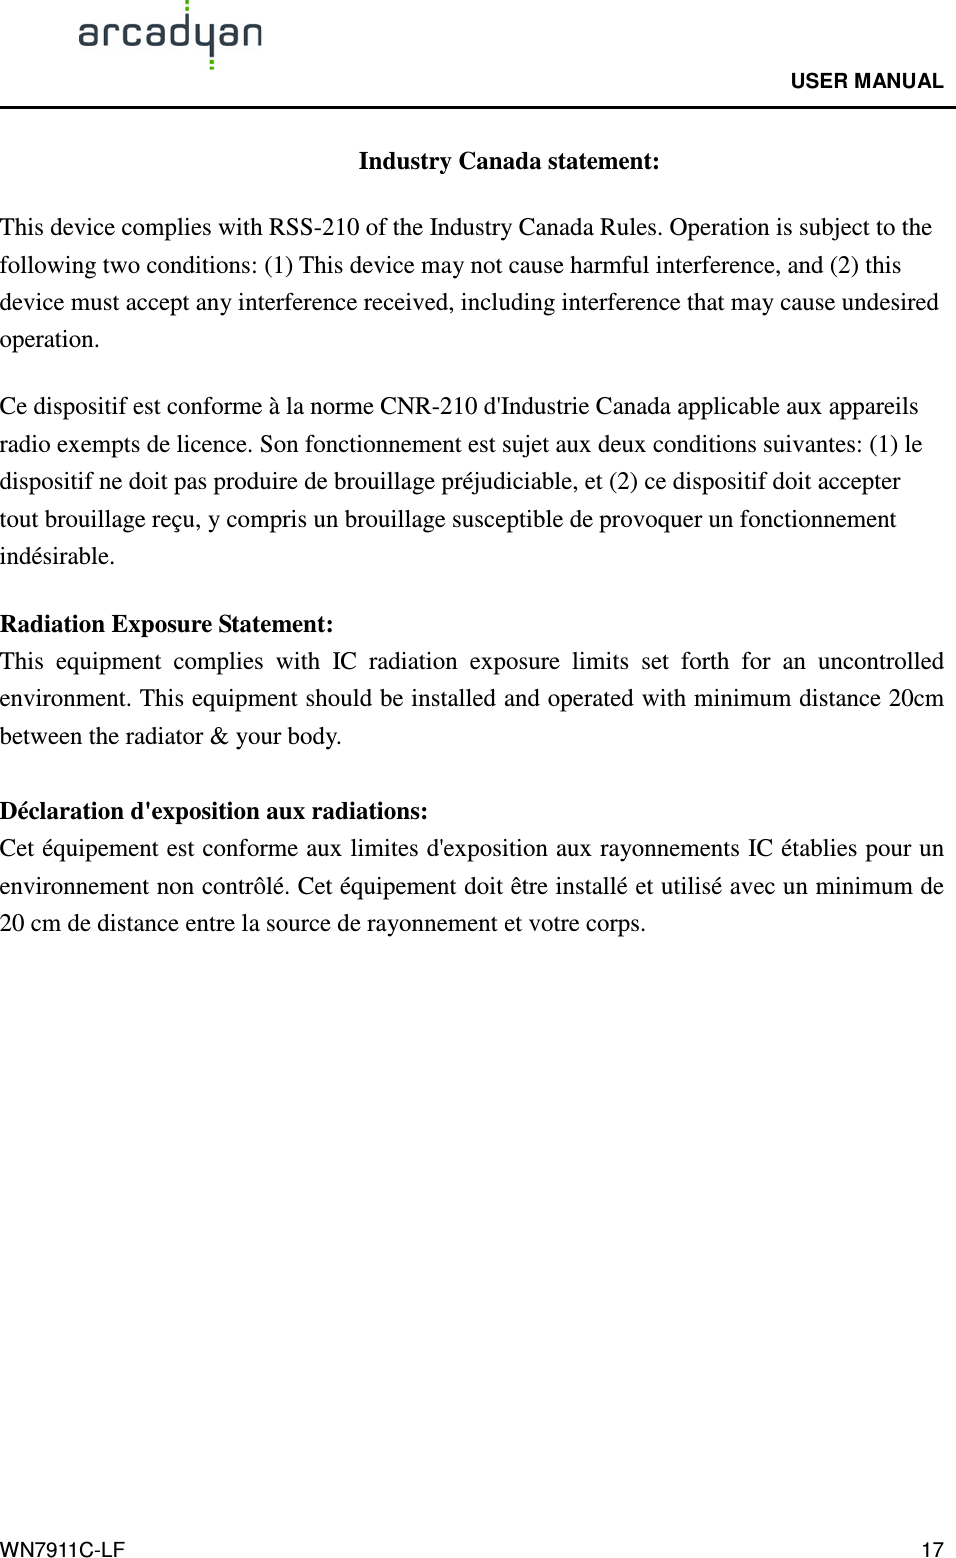                                              USER MANUAL                                              WN7911C-LF  17 Industry Canada statement: This device complies with RSS-210 of the Industry Canada Rules. Operation is subject to the following two conditions: (1) This device may not cause harmful interference, and (2) this device must accept any interference received, including interference that may cause undesired operation. Ce dispositif est conforme à la norme CNR-210 d&apos;Industrie Canada applicable aux appareils radio exempts de licence. Son fonctionnement est sujet aux deux conditions suivantes: (1) le dispositif ne doit pas produire de brouillage préjudiciable, et (2) ce dispositif doit accepter tout brouillage reçu, y compris un brouillage susceptible de provoquer un fonctionnement indésirable.   Radiation Exposure Statement: This  equipment  complies  with  IC  radiation  exposure  limits  set  forth  for  an  uncontrolled environment. This equipment should be installed and operated with minimum distance 20cm between the radiator &amp; your body.  Déclaration d&apos;exposition aux radiations: Cet équipement est conforme aux limites d&apos;exposition aux rayonnements IC établies pour un environnement non contrôlé. Cet équipement doit être installé et utilisé avec un minimum de 20 cm de distance entre la source de rayonnement et votre corps. 